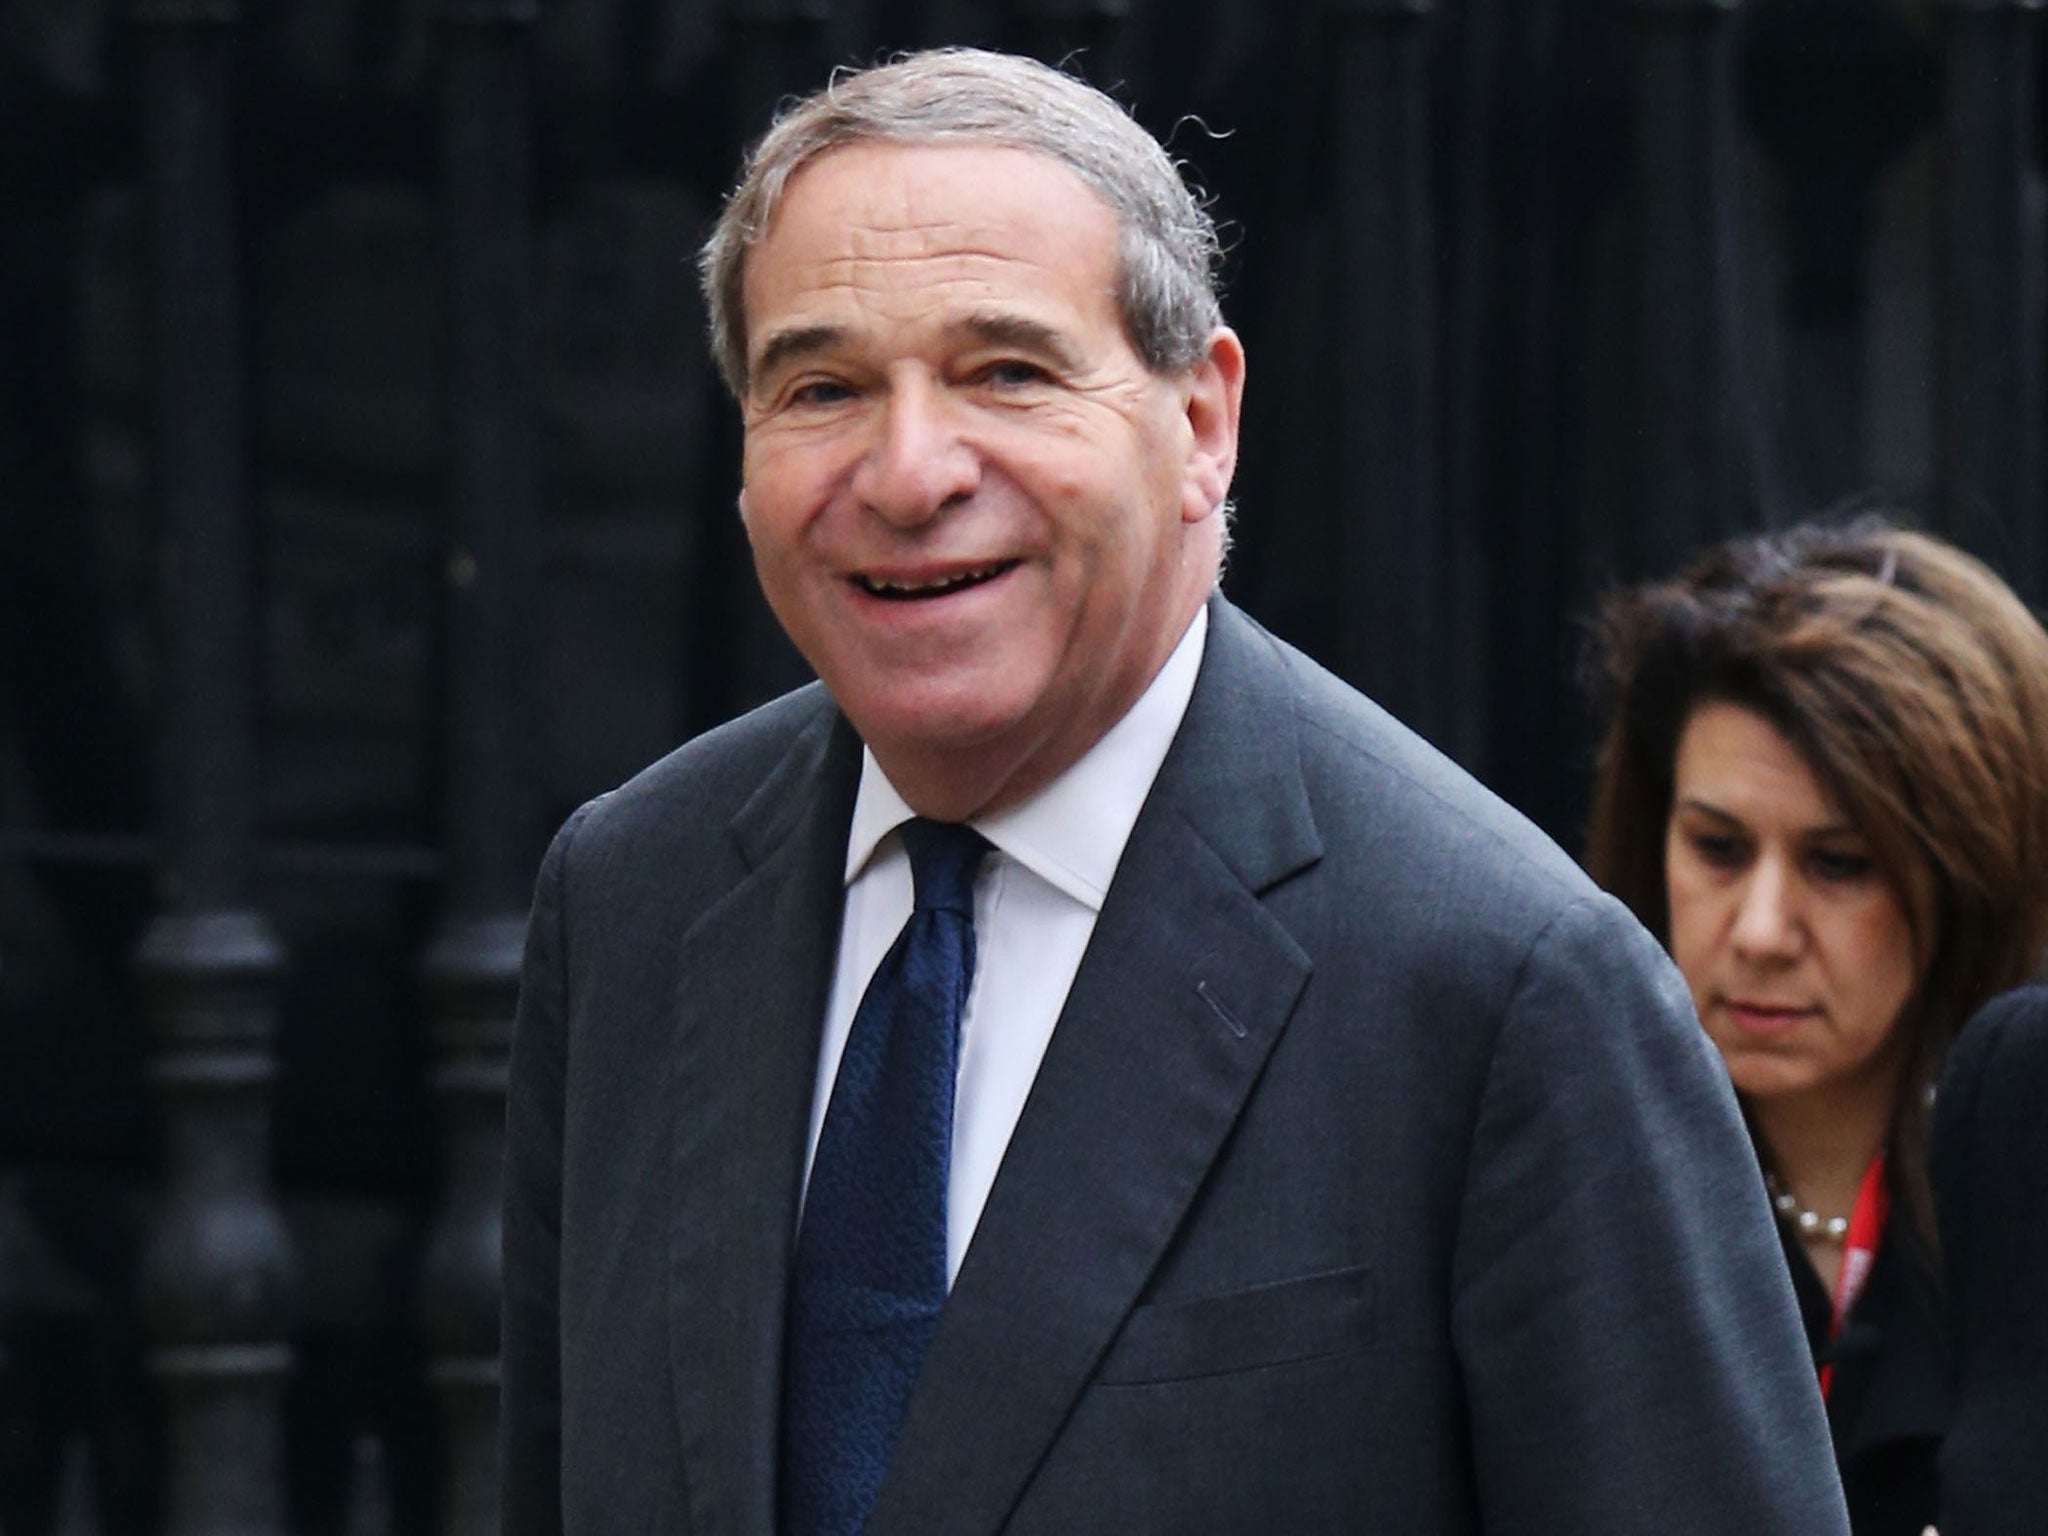 Lord Brittan has long been at the centre of rumours that dated back before 1984